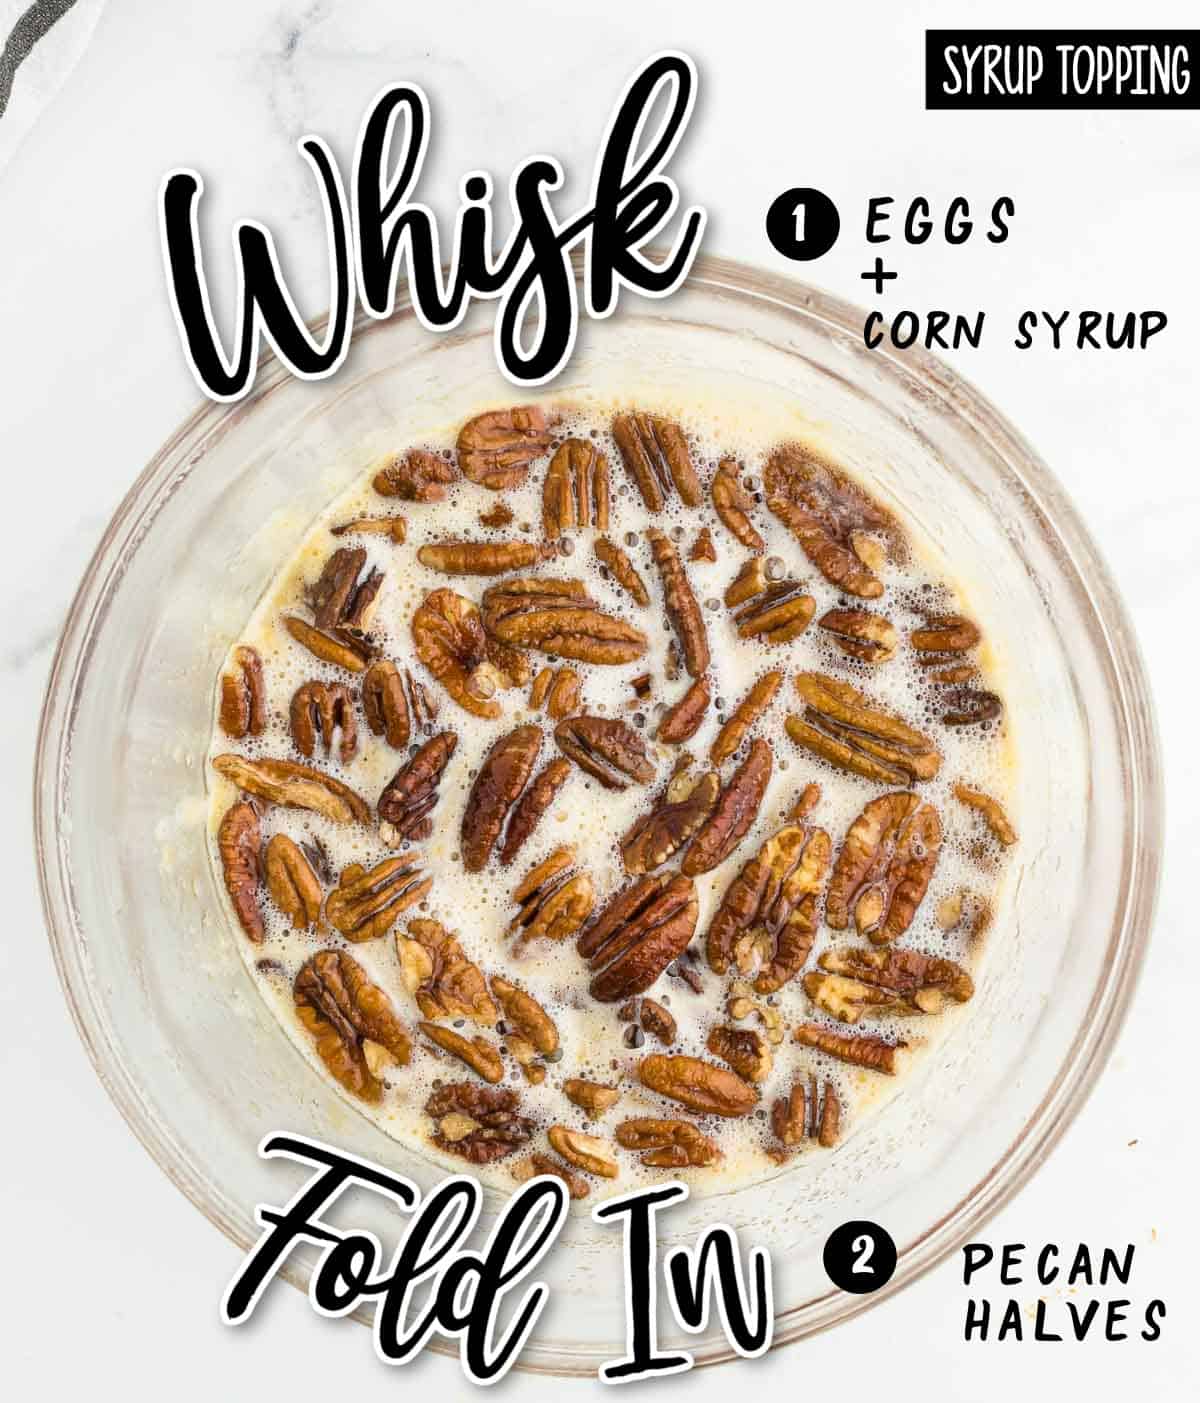 Step: Whisk eggs and corn syrup + fold in pecan halves